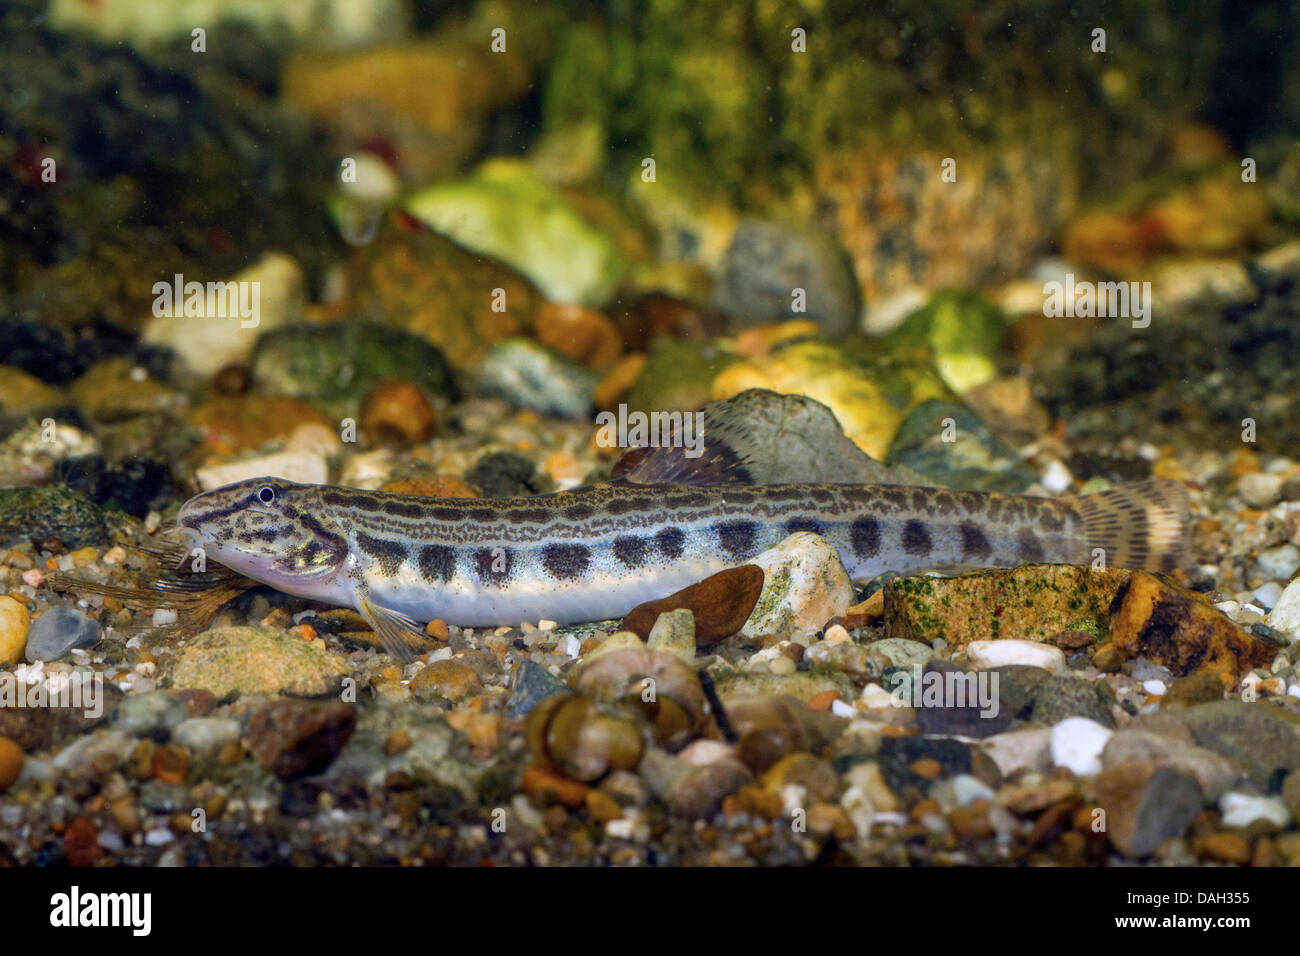 spined loach, spotted weatherfish (Cobitis taenia), juvenile at the gravel ground of a water Stock Photo